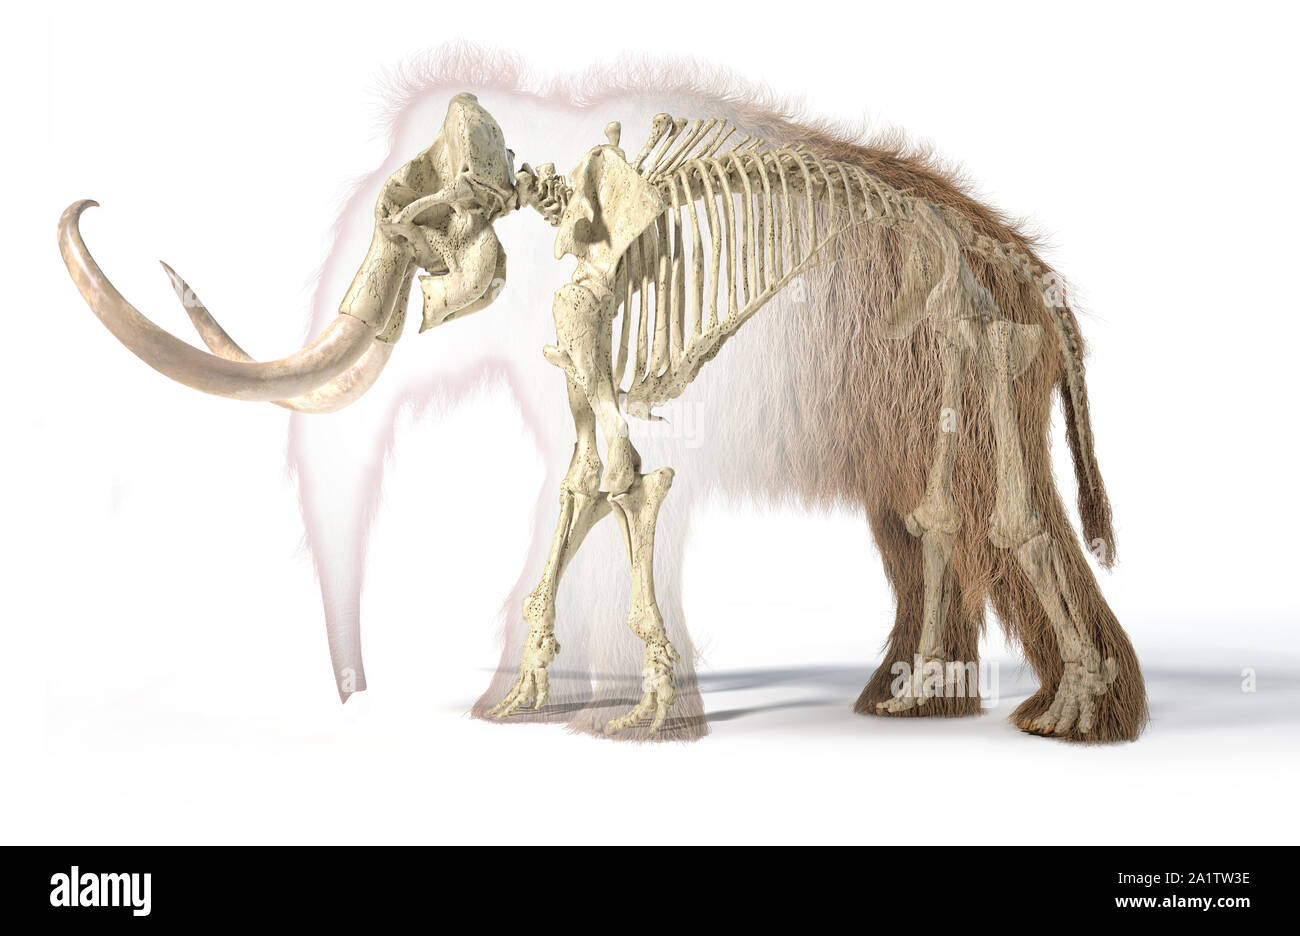 Woolly mammoth realistic 3d illustration with skeleton in morph effect, viewed from a side. On white background and dropped shadow. Stock Photo